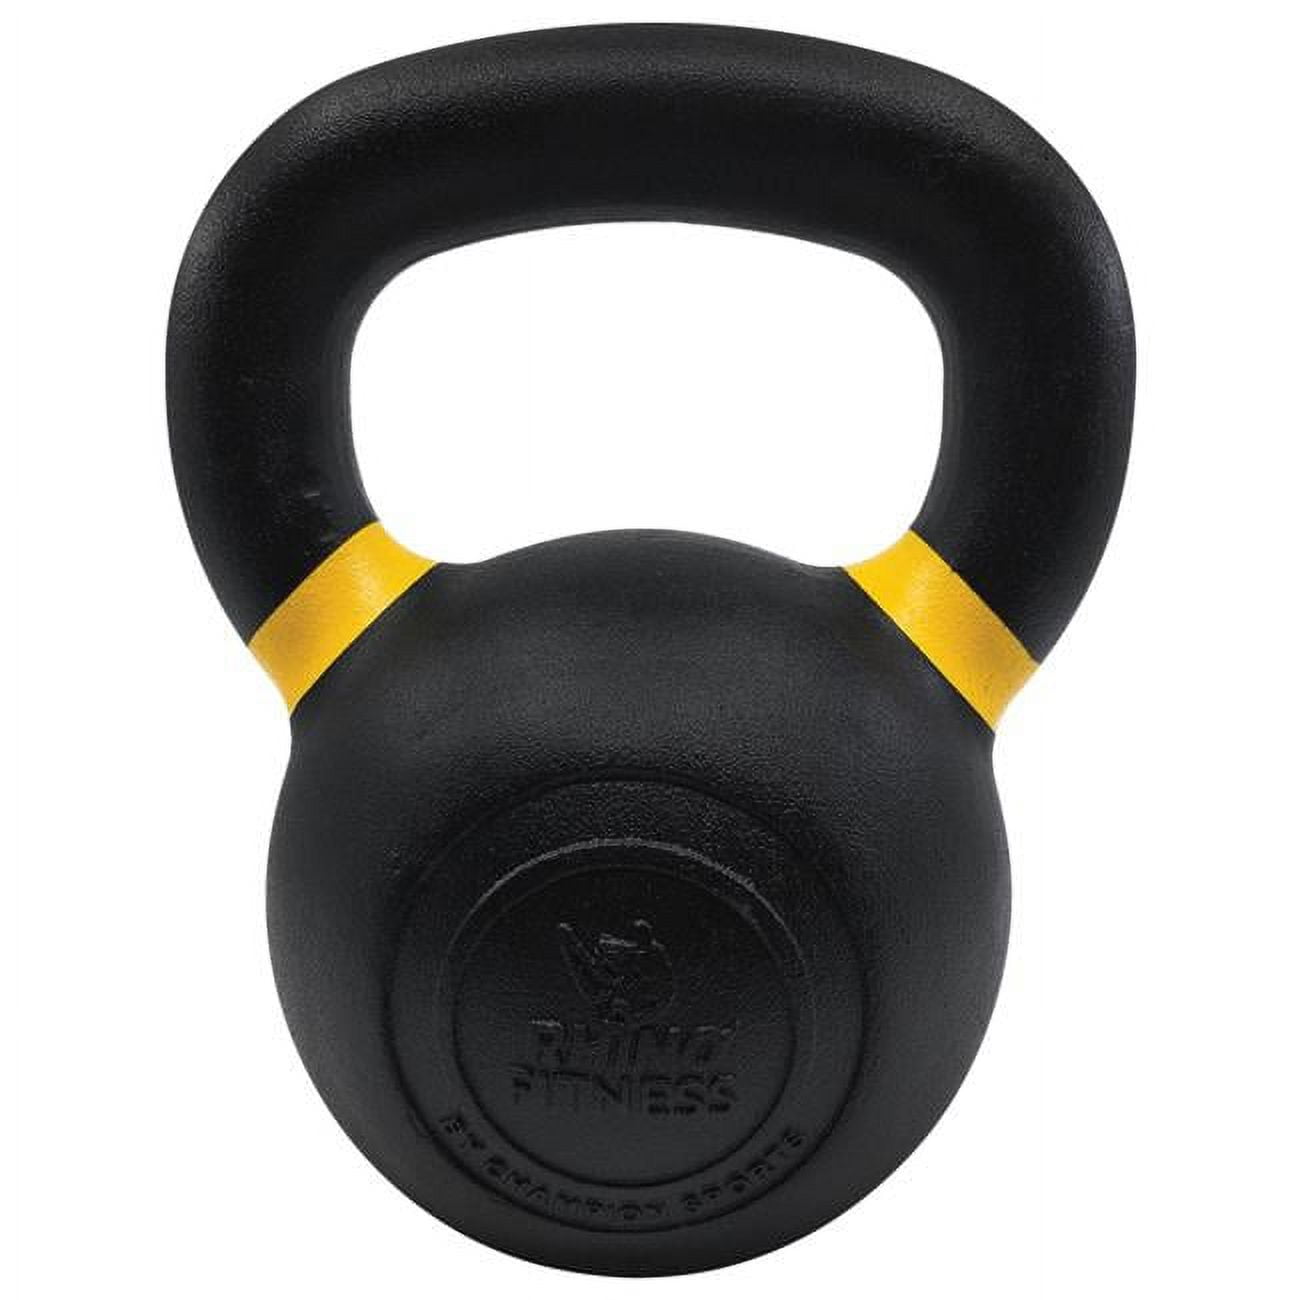 Picture of Champion Sports PCK35 7 x 5 x 9 in. 35 lbs Iron Kettlebell with Yellow Handles